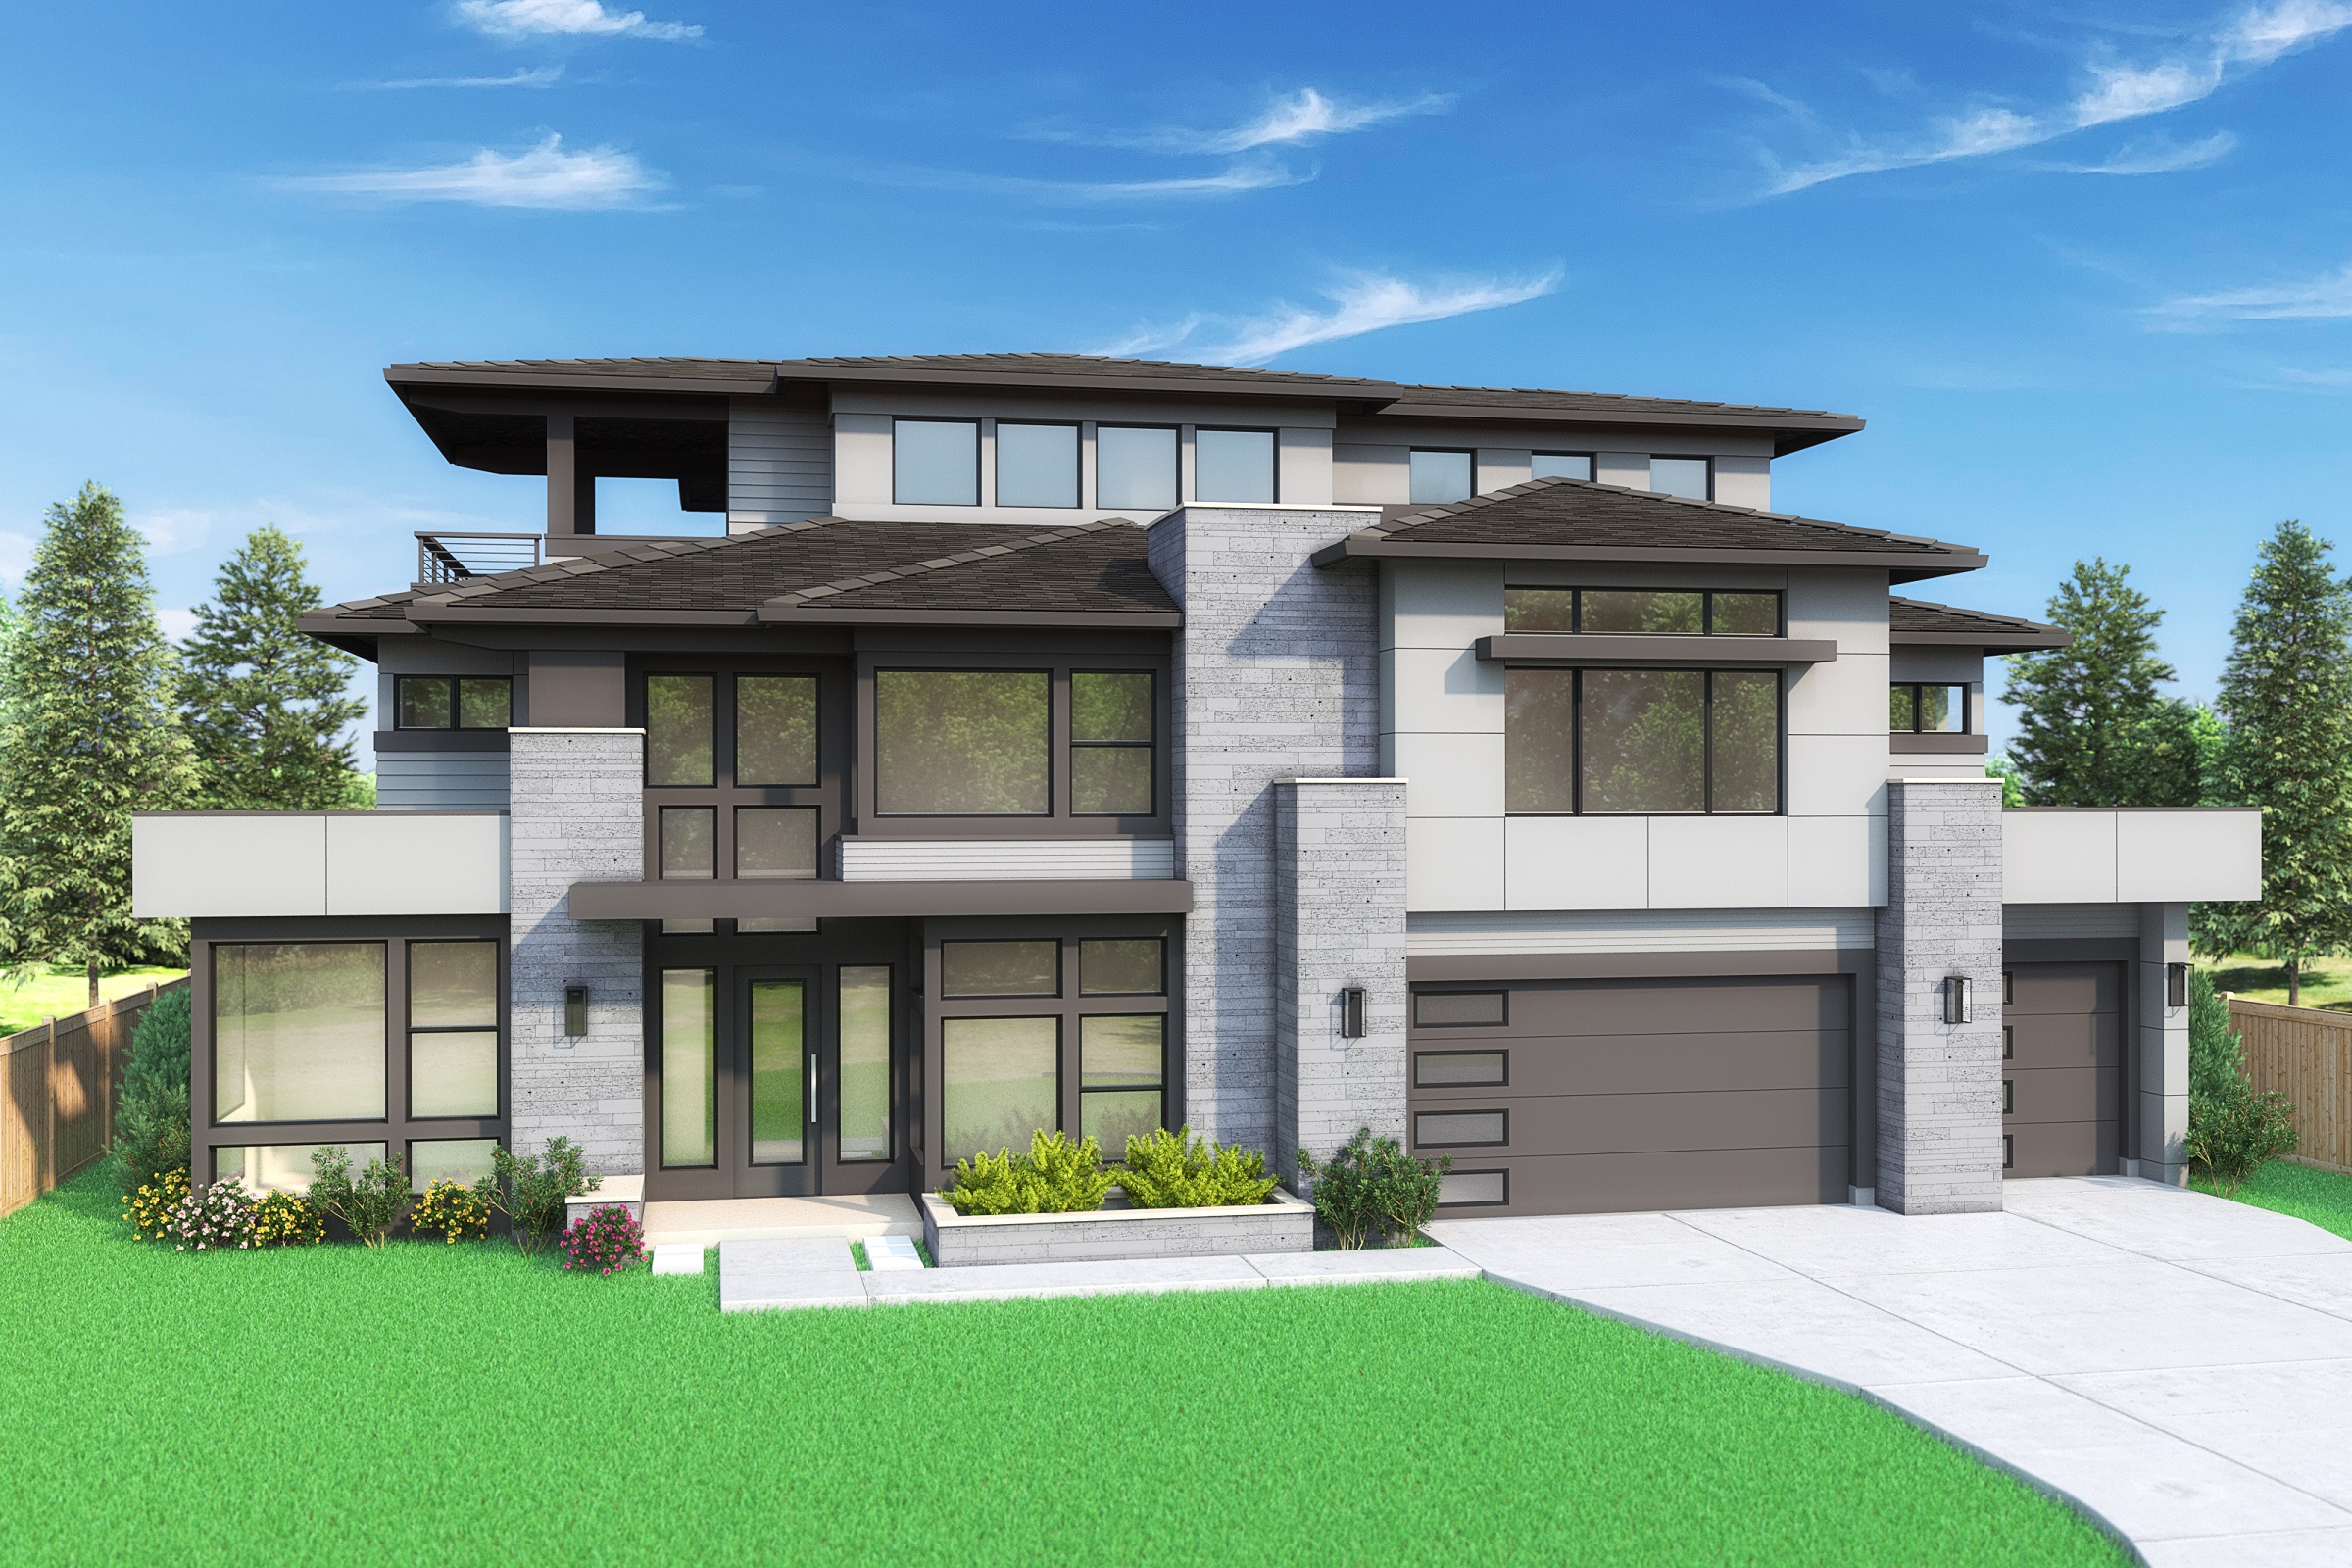 View our new luxury home construction on 9811 NE 16th St, in Bellevue, WA from MN Custom Homes